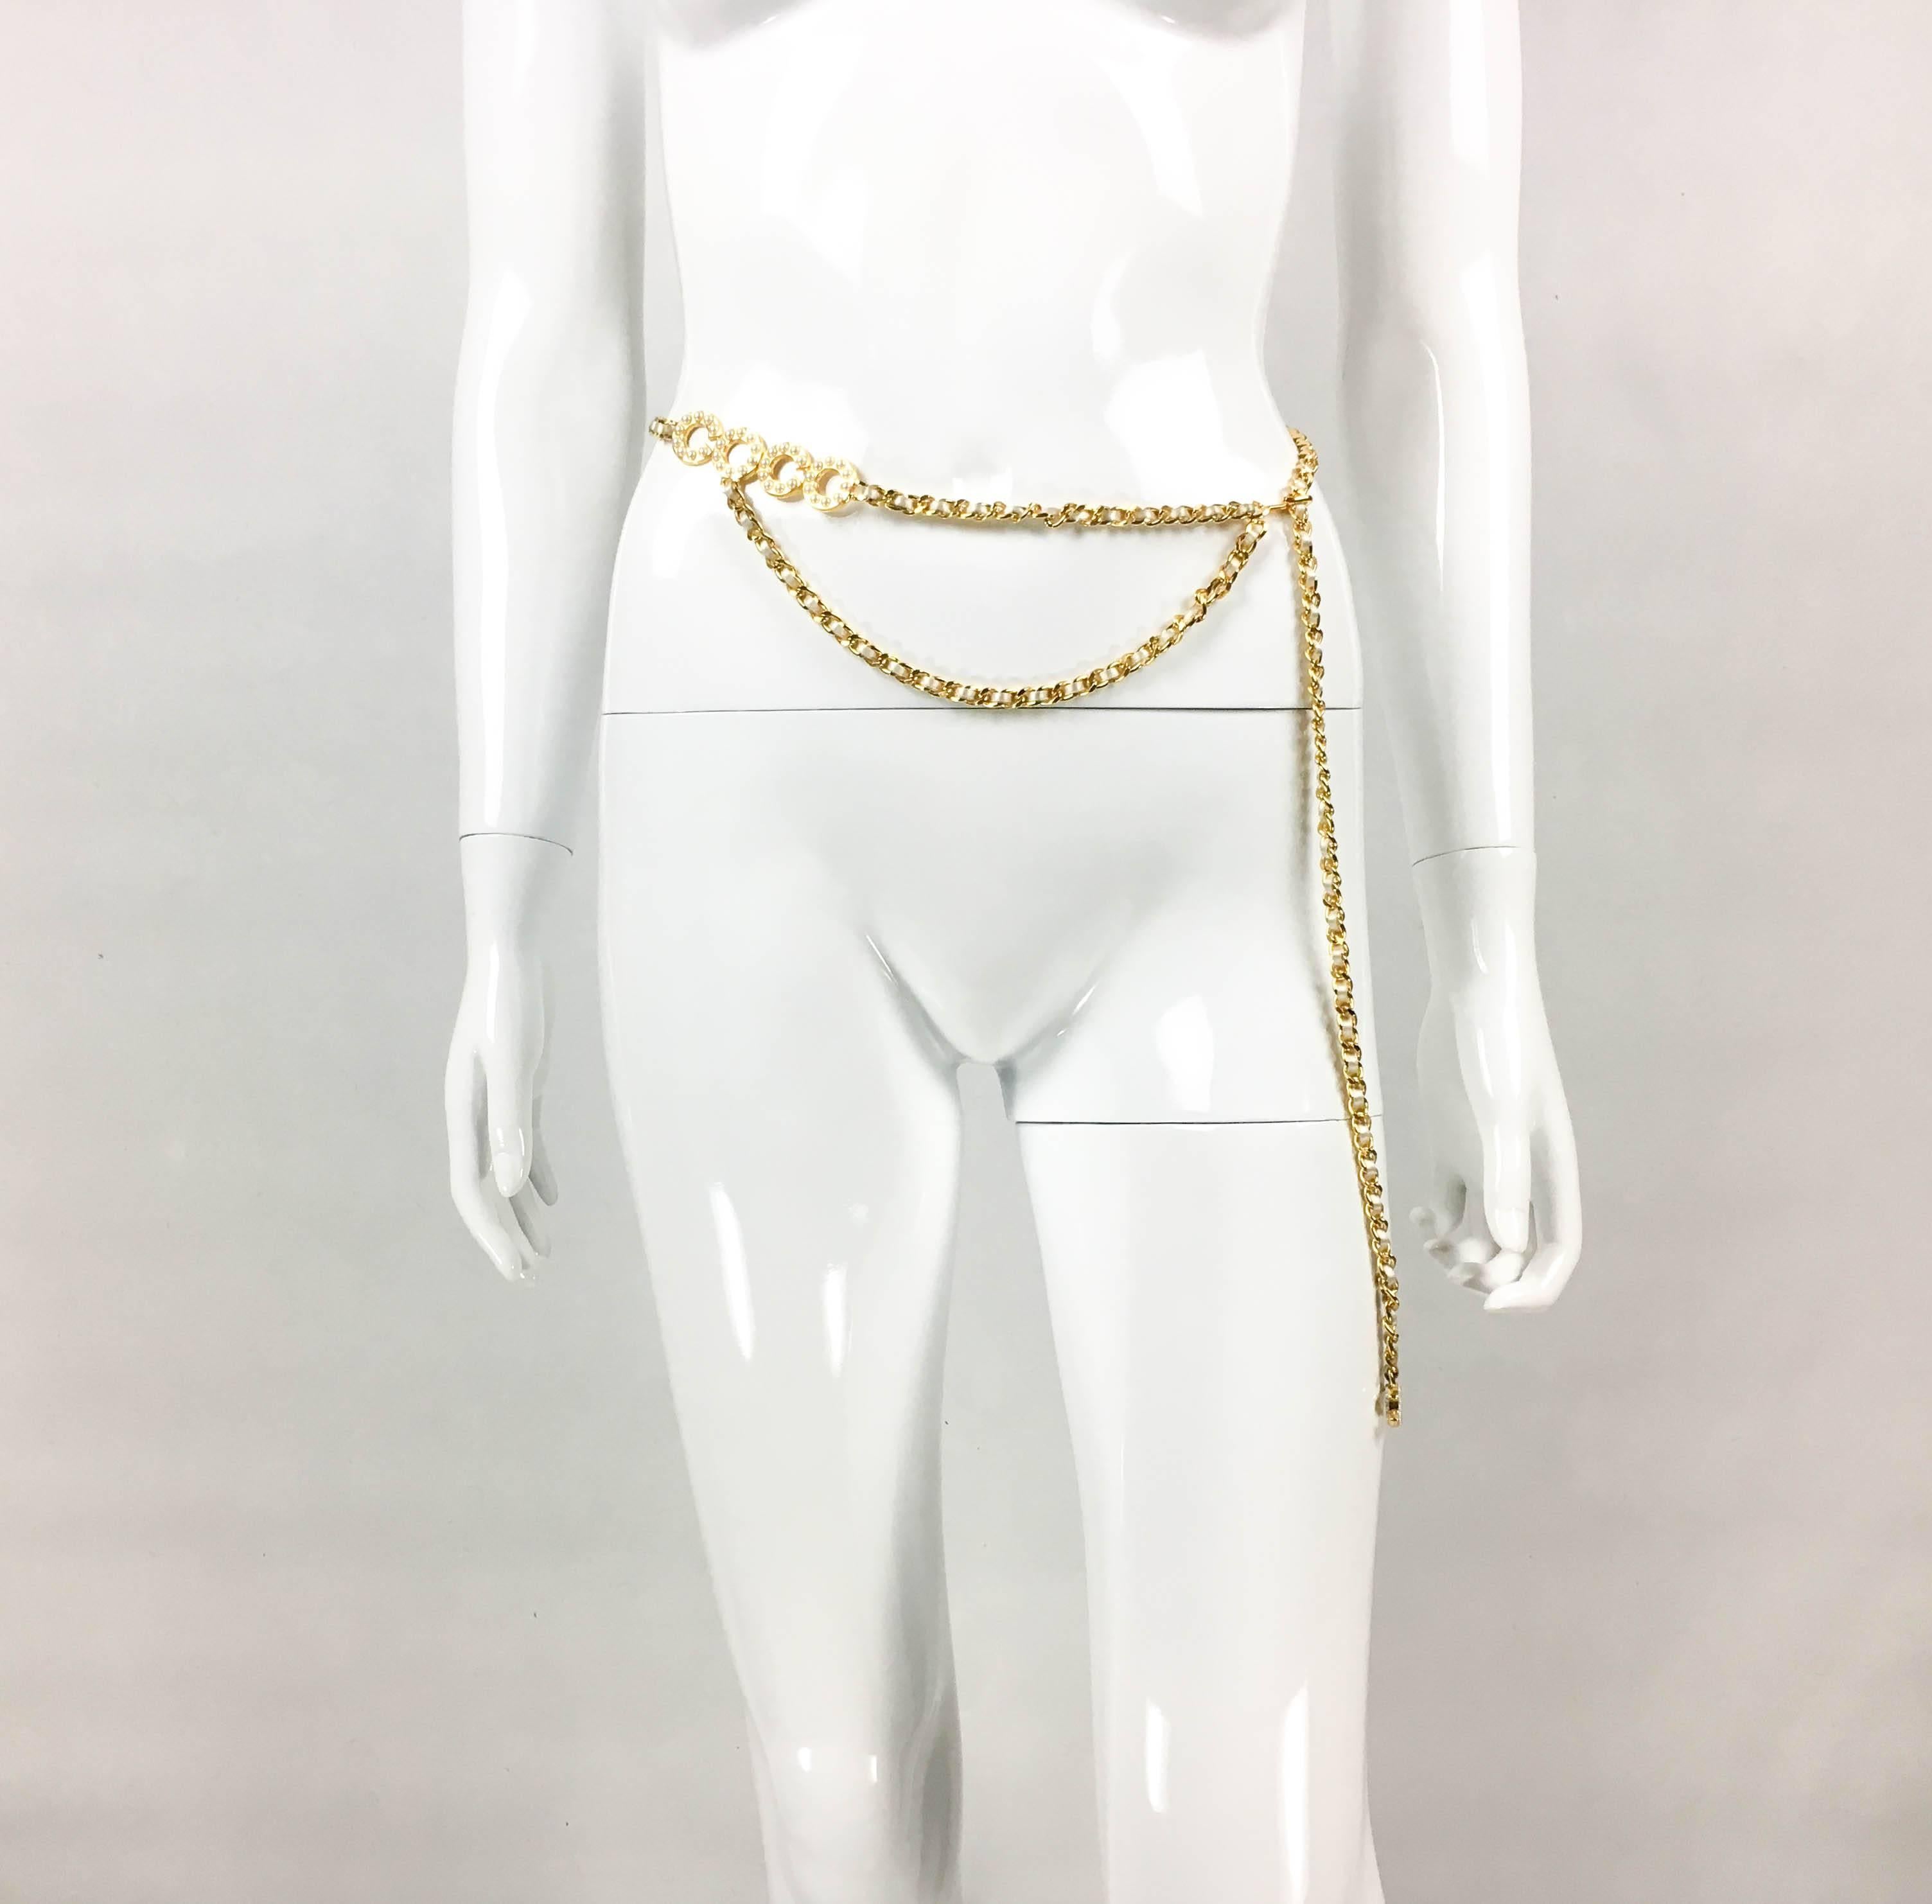 Beige Chanel Gold-Tone Woven Chain and Faux Pearl 'Coco' Belt / Necklace - 2001